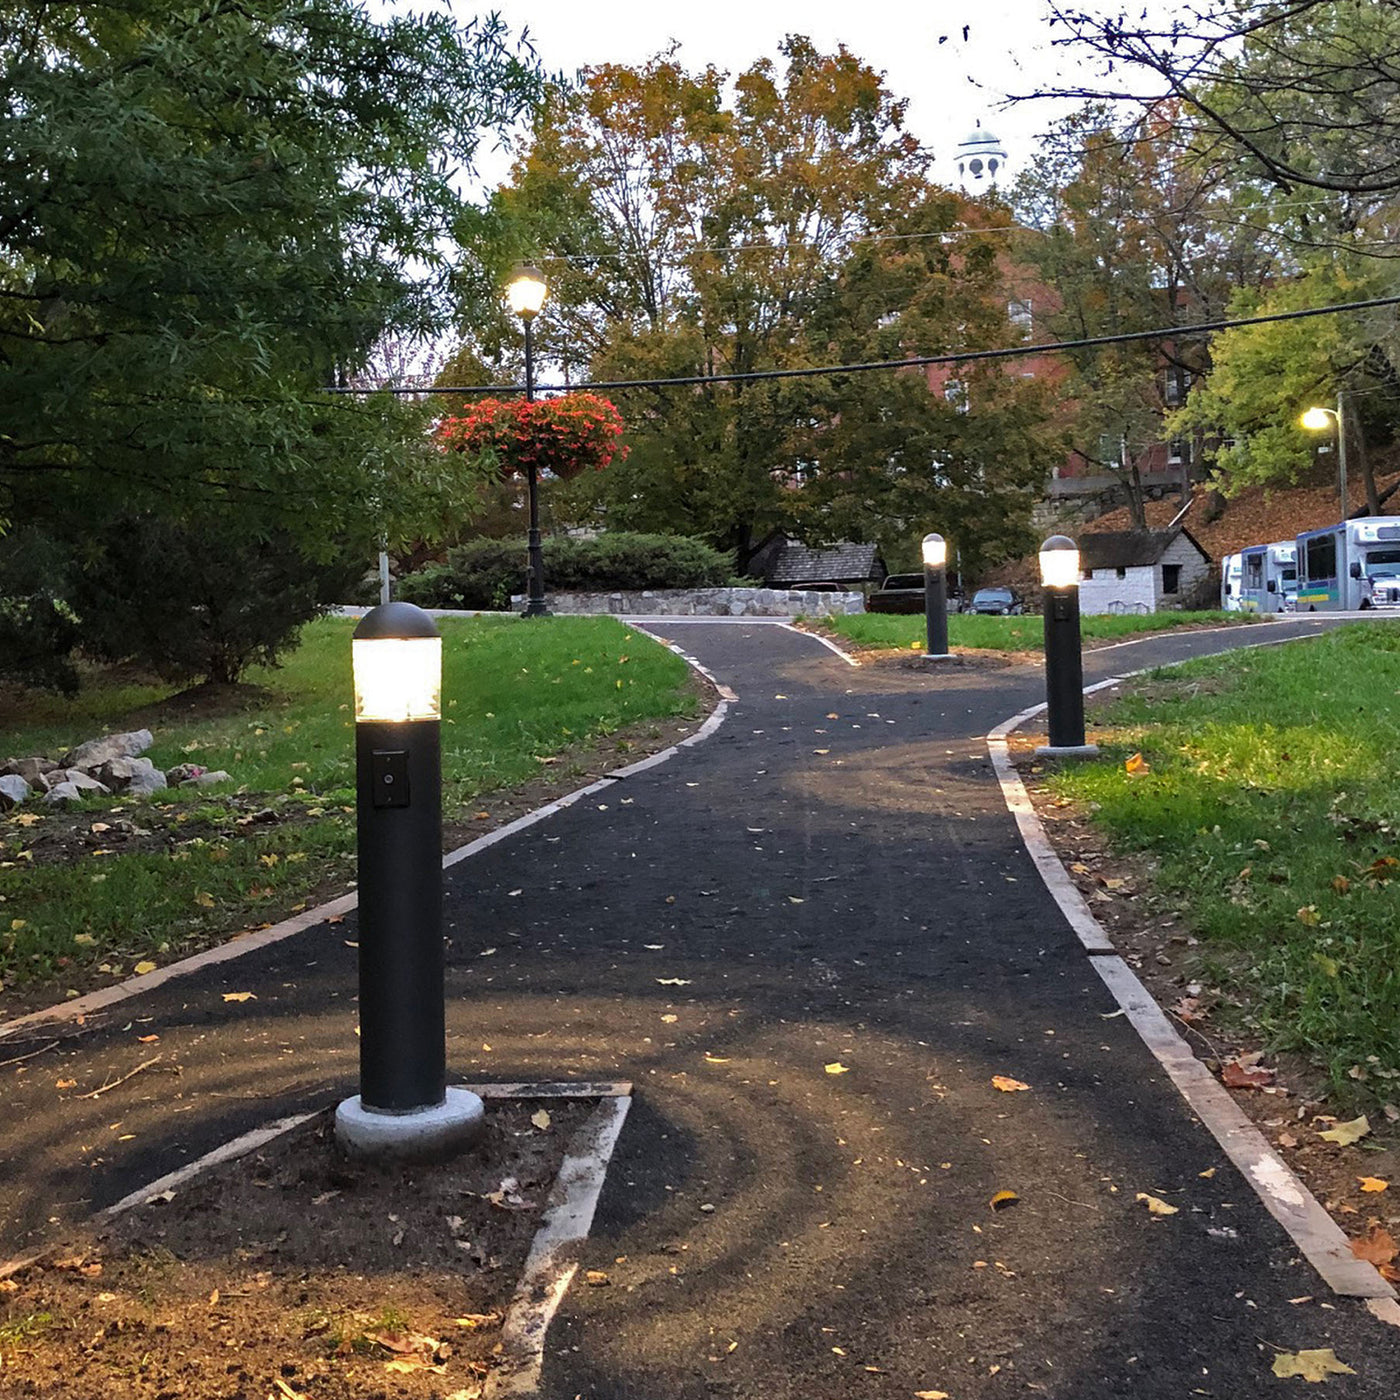 LED Bollard Light Fixtures for Montwell Commons in Lewisburg